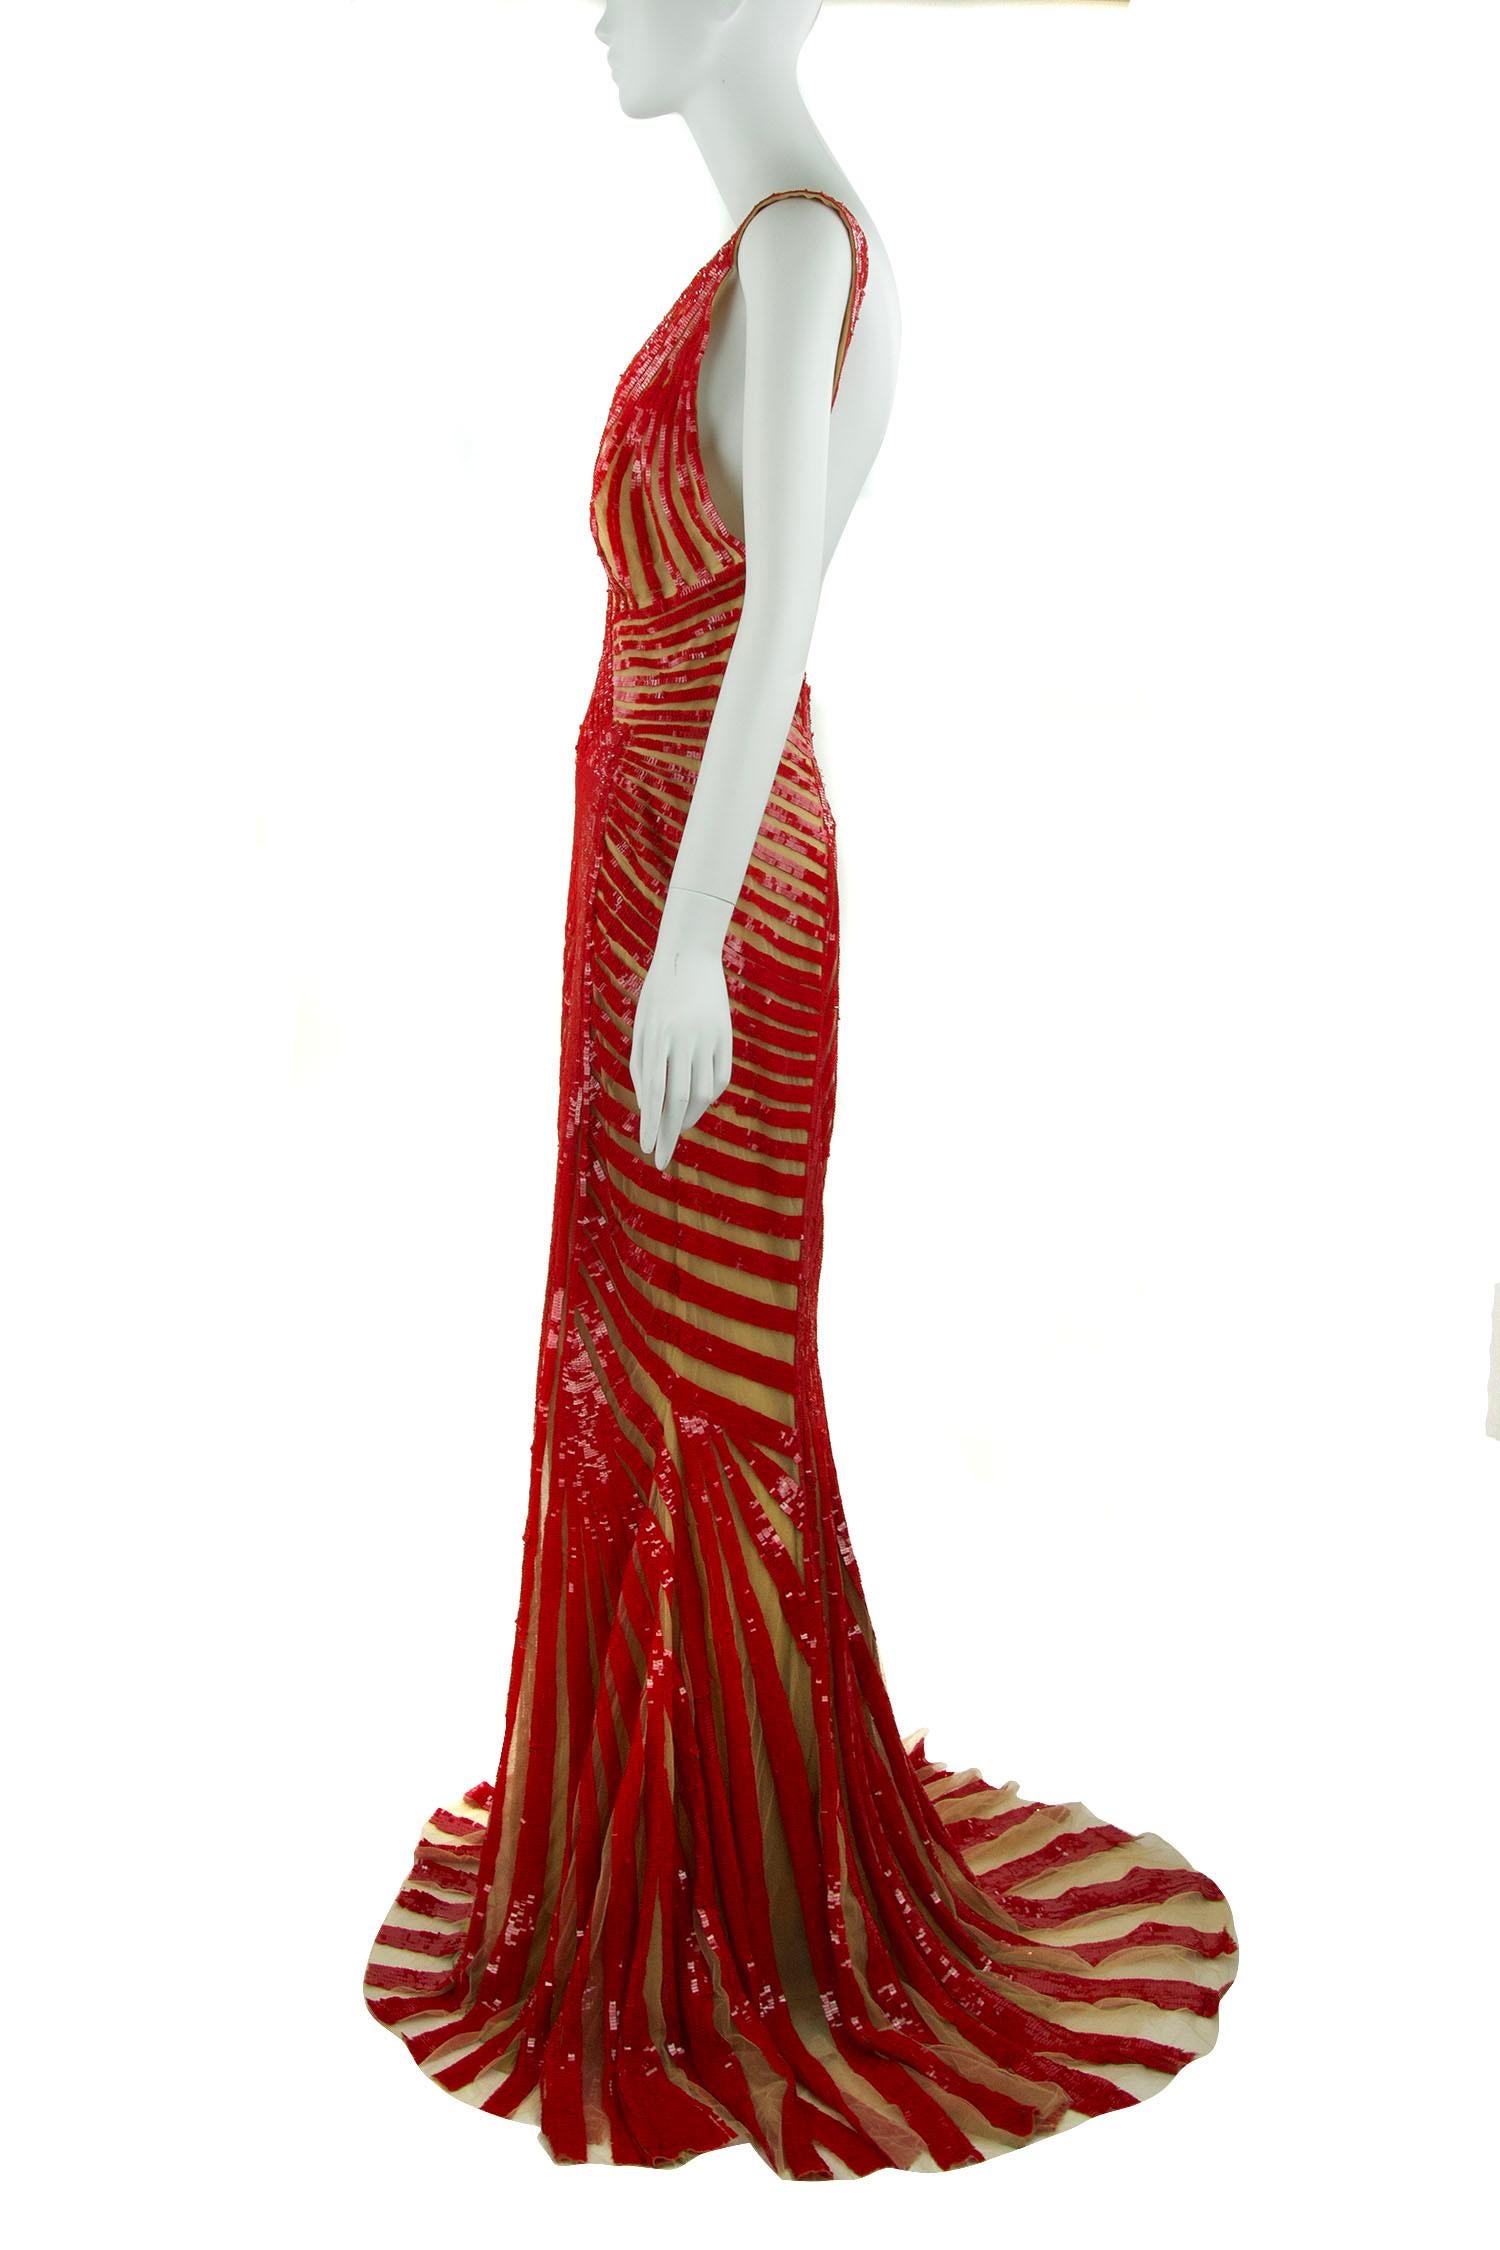 Look no further for the dress that will turn heads at your next formal event.  Incredible red beading making beautiful patterns and interesting detail down the gown.  With a very sexy open back, this piece is absolutely ravishing.

Size: US 4 &